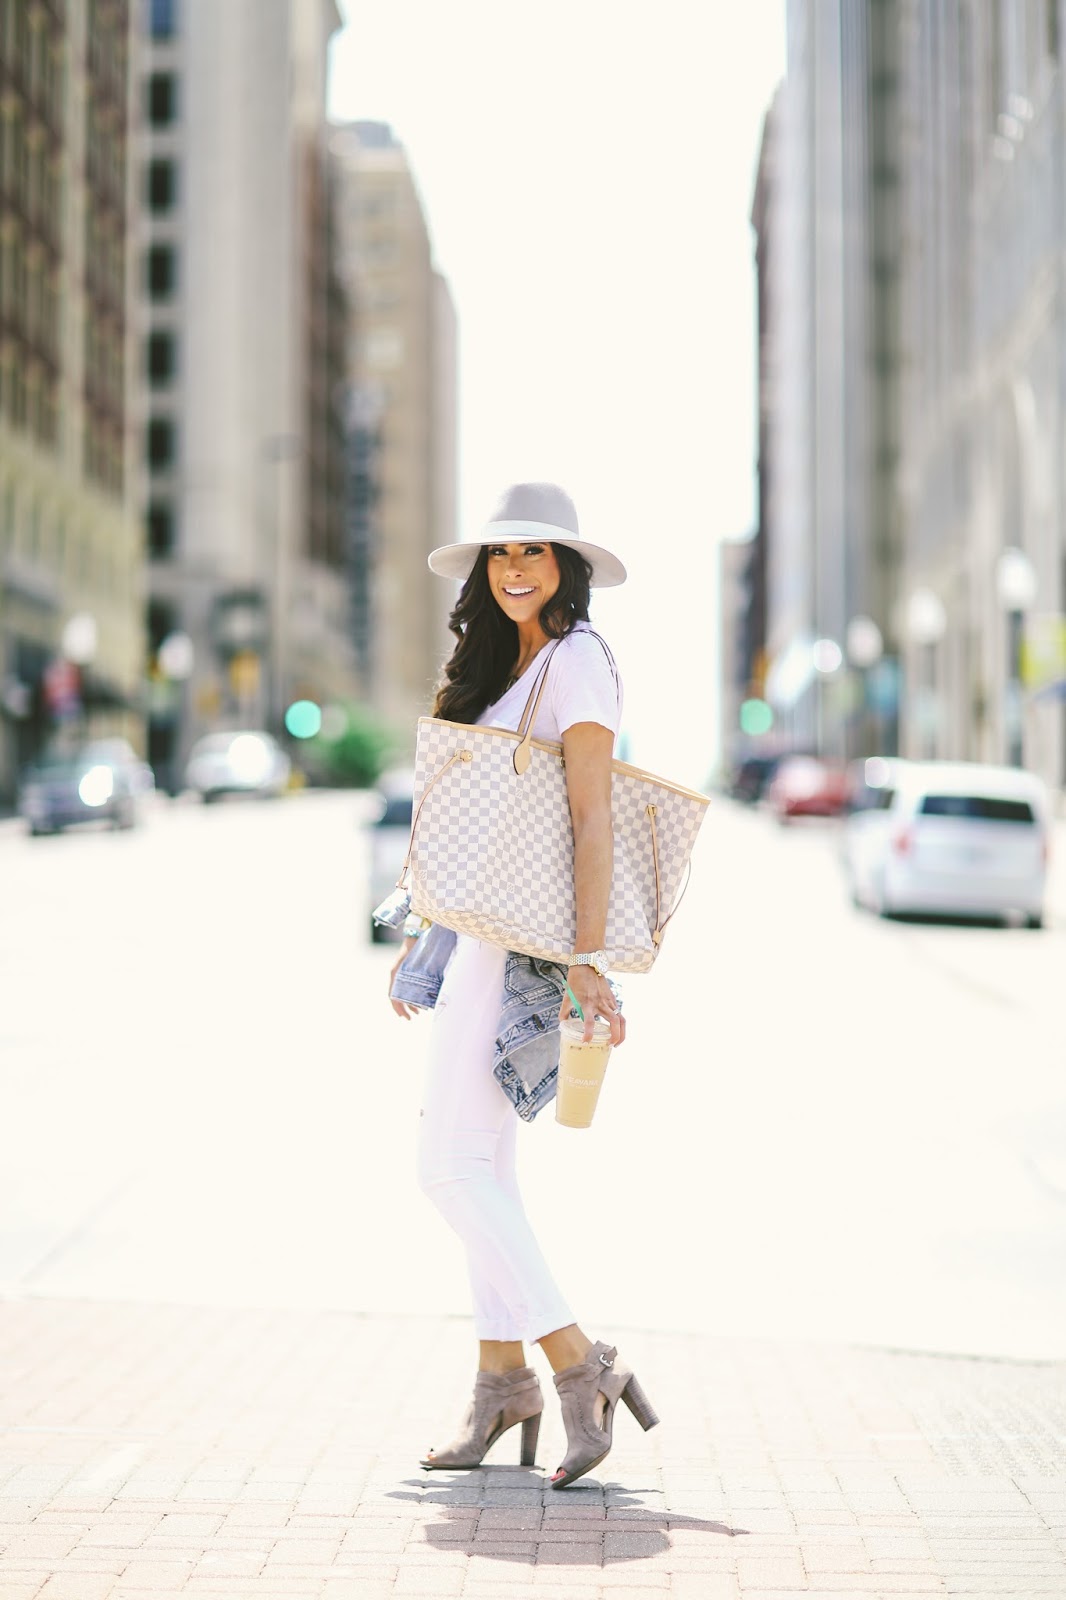 all white outfits for spring and summer, louis vuitton neverful damier azur, j brand white distressed denim, white tee made well, janessa leone grey hat, summer fashion pinterest, spring fashion pinterest, outfit idea summer pinterest, tulsa fashion blogger, downtown tulsa, vince camuto conley bootie, michele Serein watch 18mm, david yurman bracelet stack, emily gemma, the sweetest thing blog, celine mirrored aviators